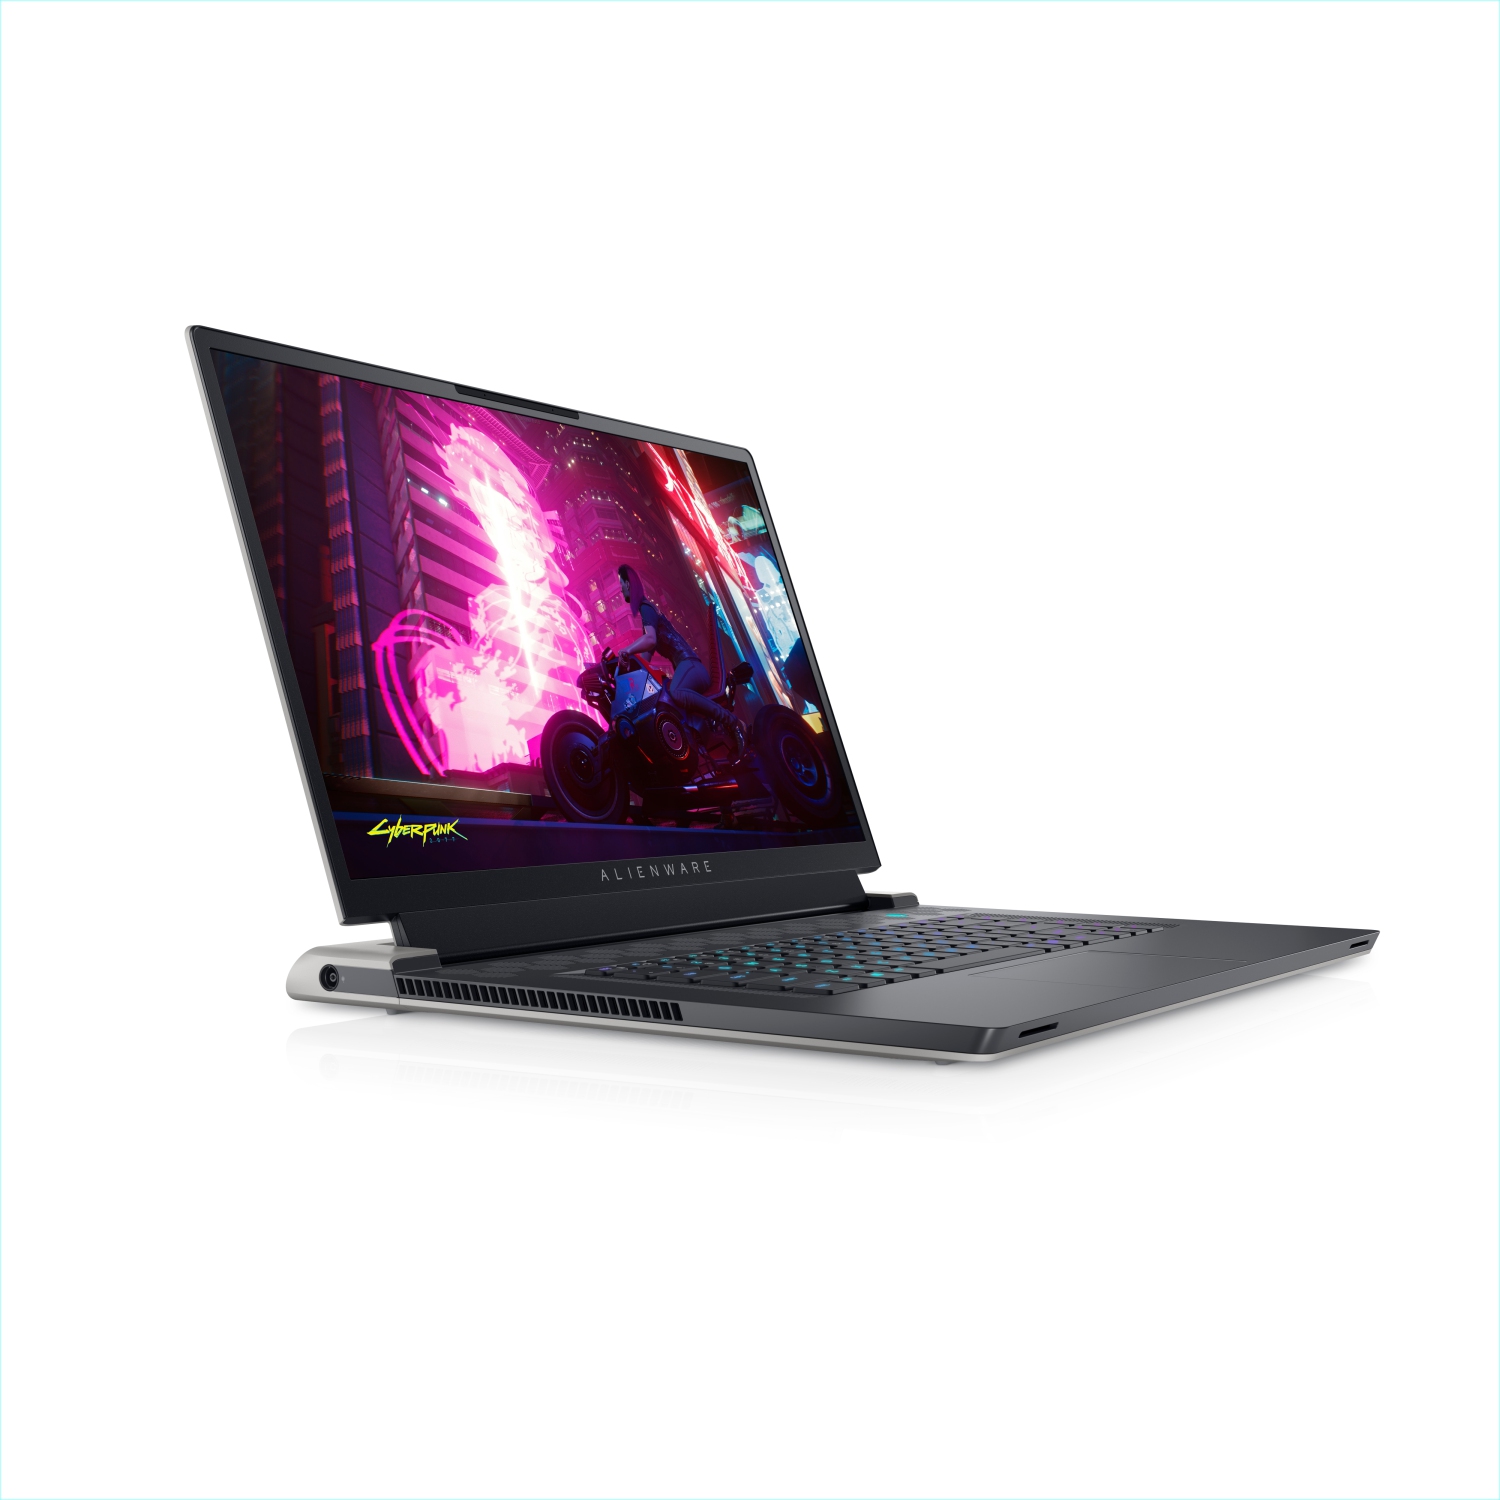 Refurbished (Excellent) - Dell Alienware X17 R1 Gaming Laptop (2021), 17.3" 4K, Core i7, 256GB SSD, 16GB RAM, RTX 3080, 8 Cores @ 4.6 GHz, 11th Gen CPU Certified